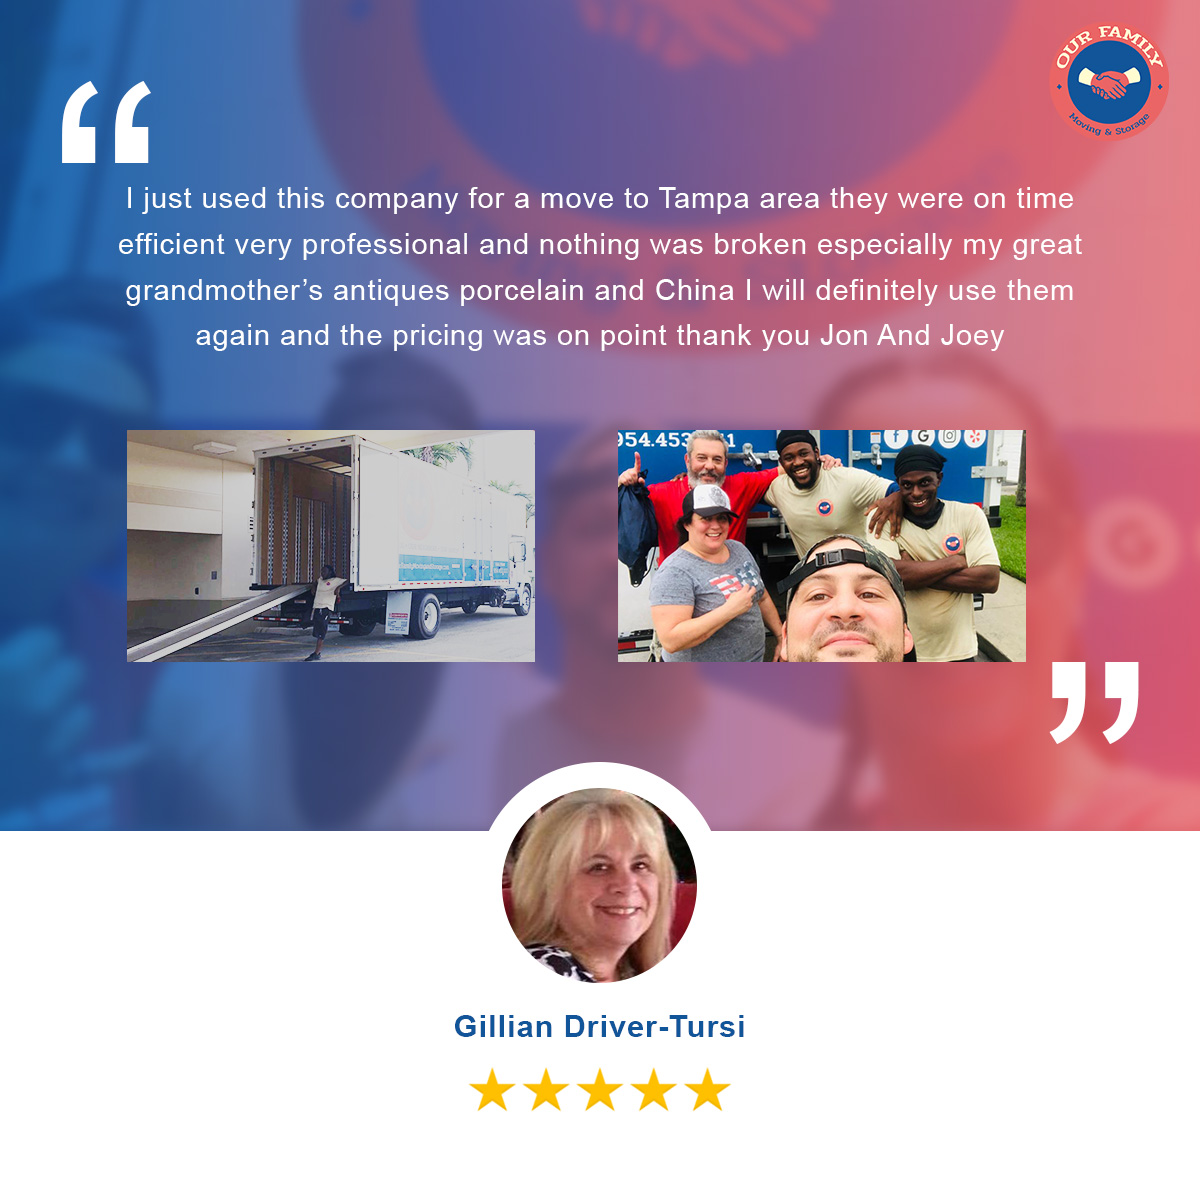 a review of Our Family Moving and Storage from Gillian Driver-Tursi